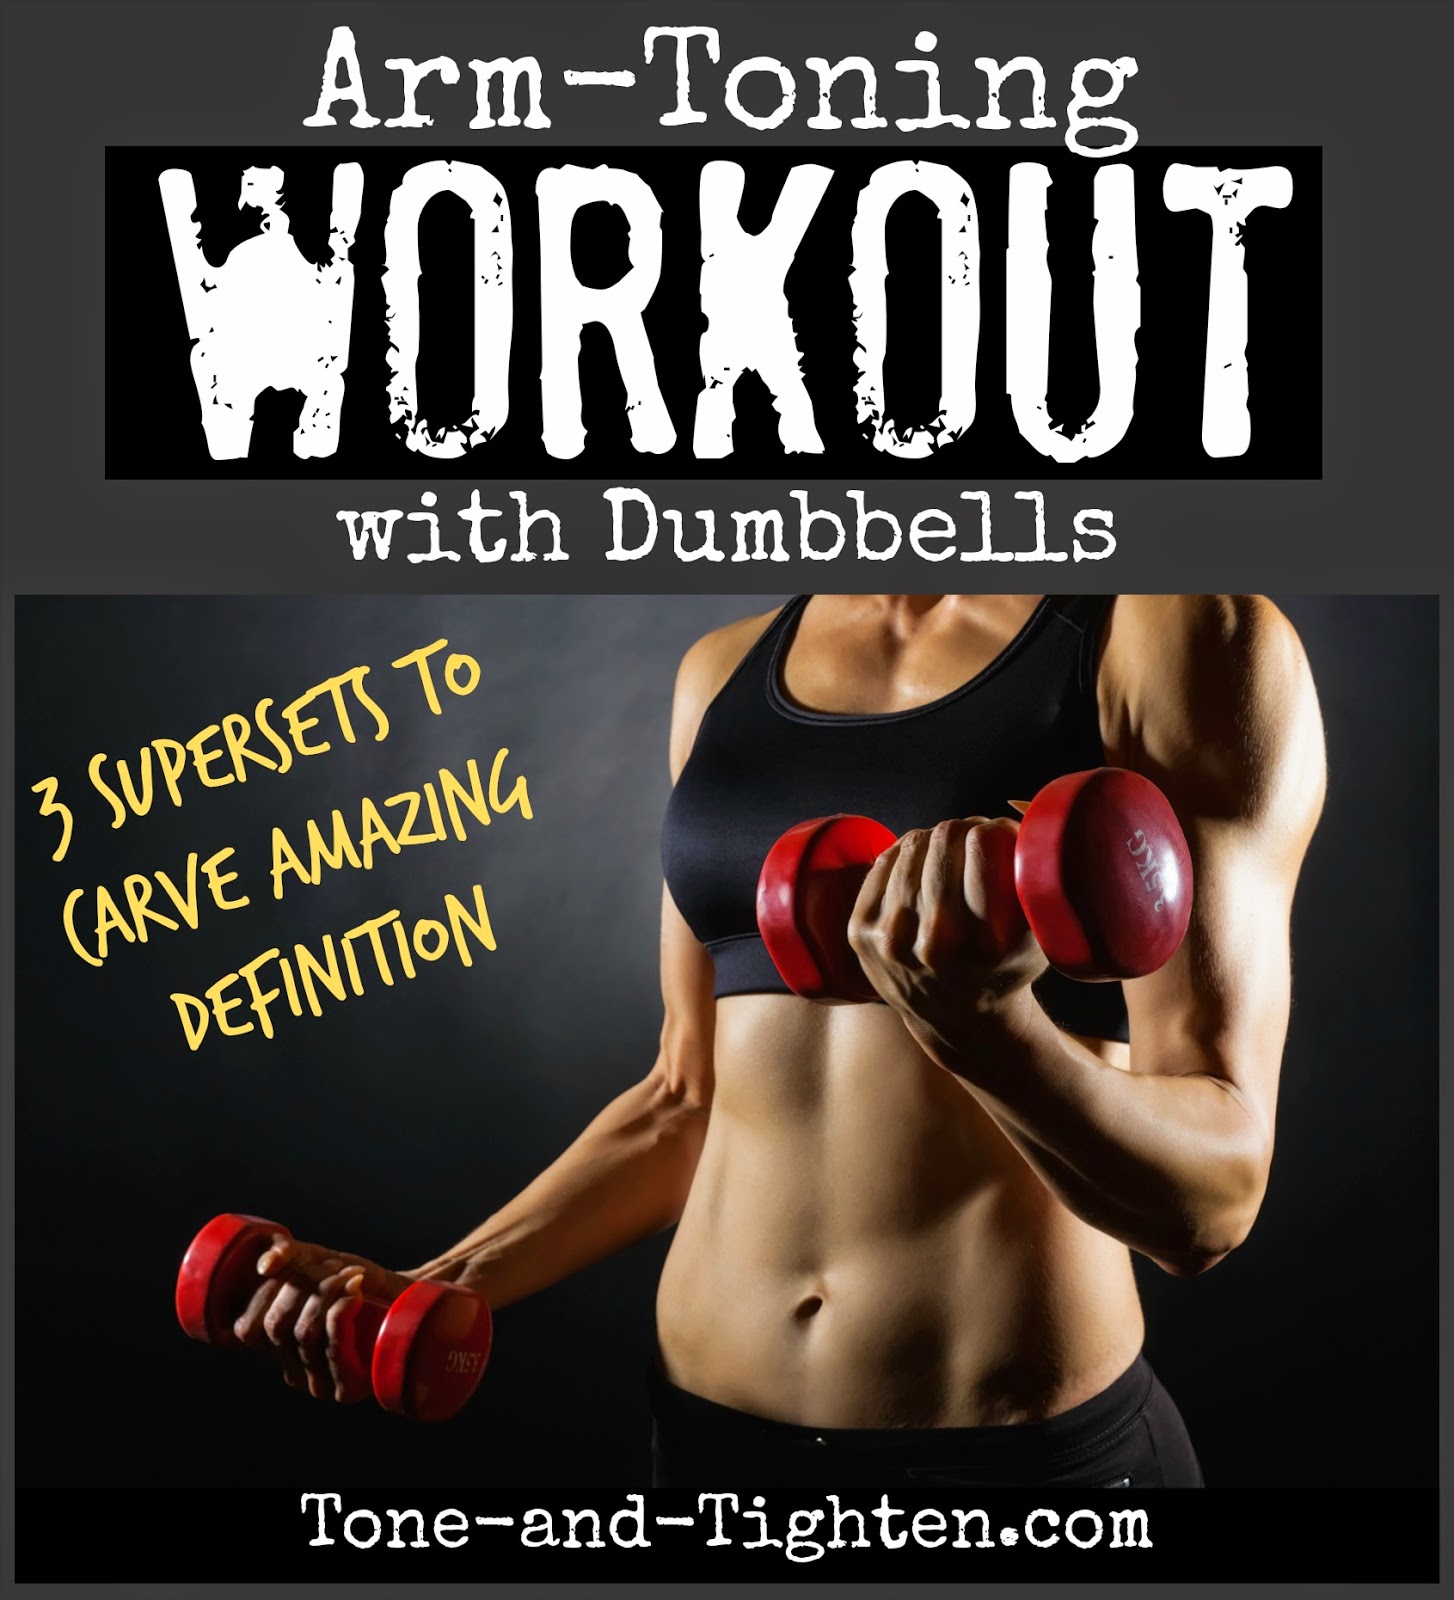 The Best Arm Toning Workout with Dumbbells | Tone and Tighten